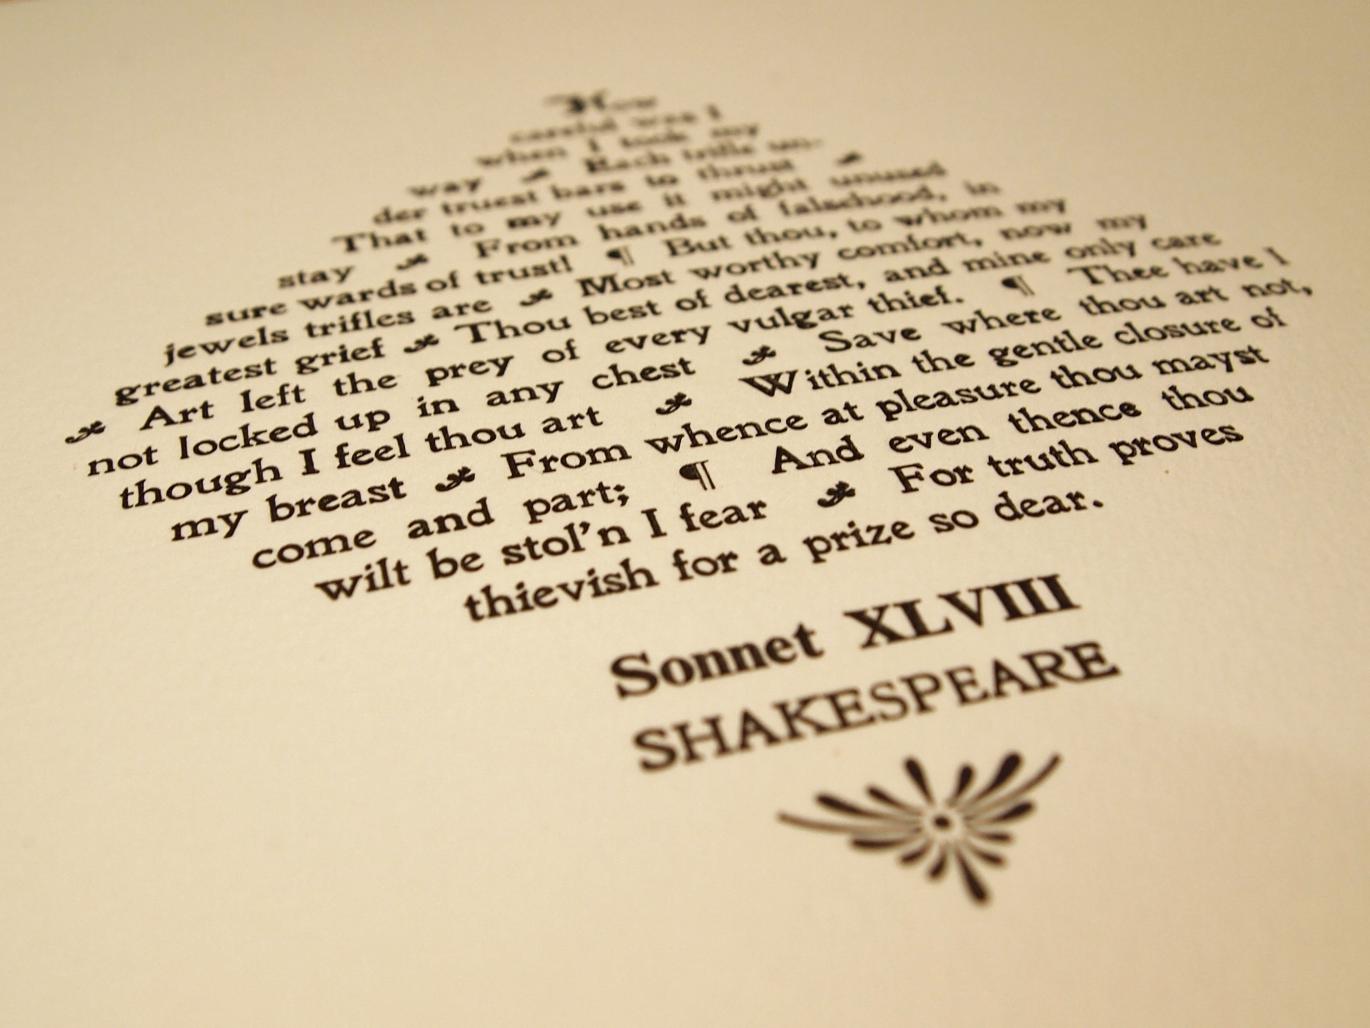 How Can Shakespeare's Sonnets Be Used To Teach Students About Poetry And Literature?